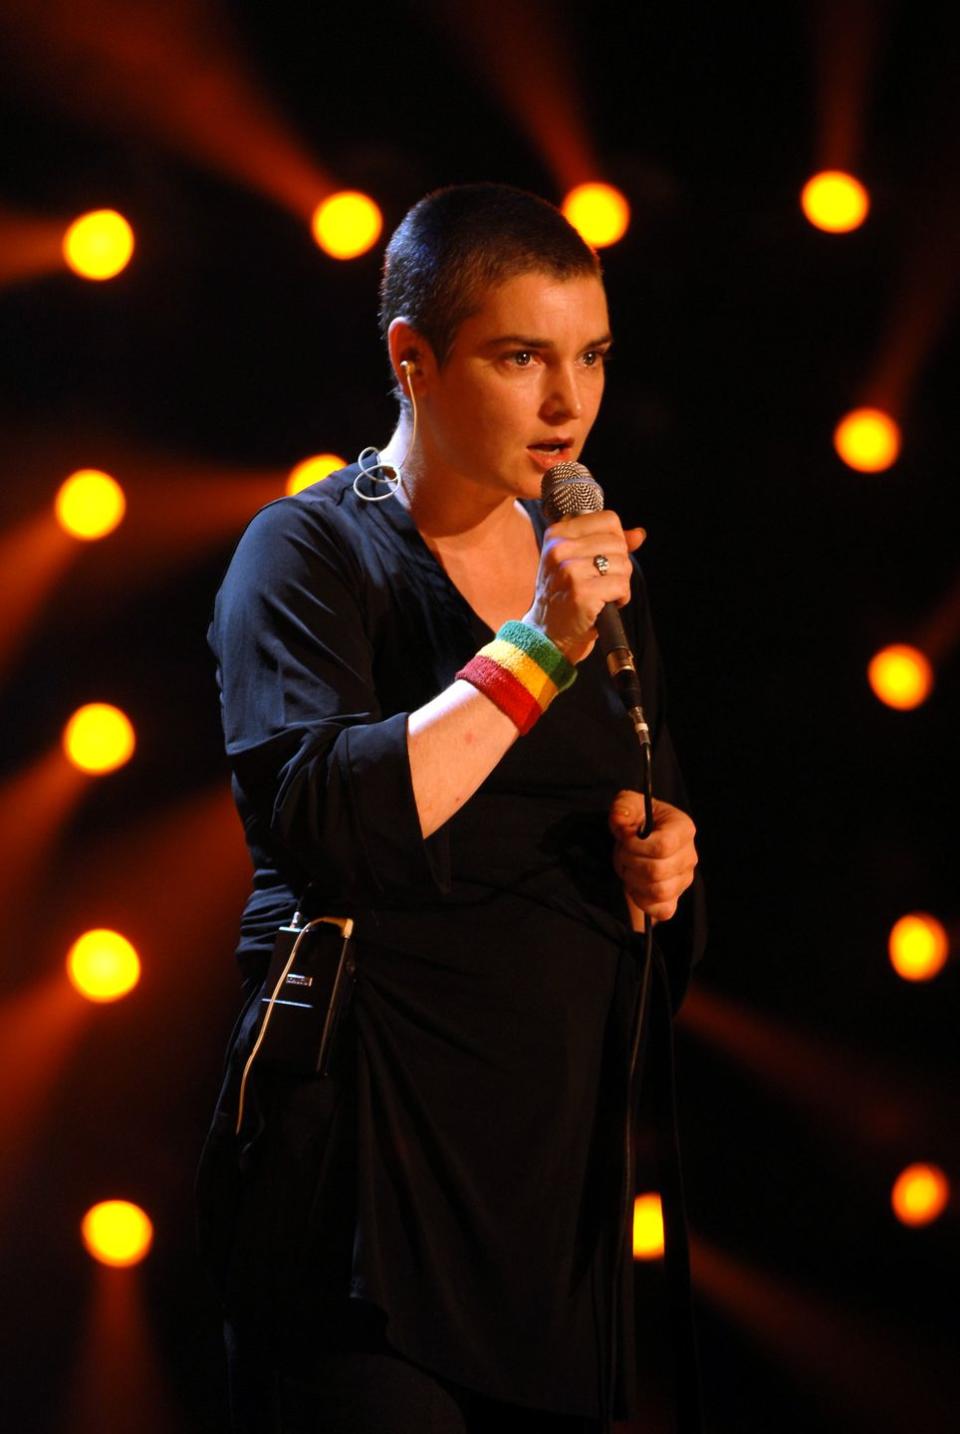 <p>Sinead O'Connor has spoken out about her bipolar diagnosis in a 2007 interview with Oprah. But she struggled even more in 2015 after she underwent a hysterectomy to treat endometriosis, per <a href="https://ew.com/books/sinead-oconnor-rememberings-memoir-interview/" rel="nofollow noopener" target="_blank" data-ylk="slk:Entertainment Weekly" class="link ">Entertainment Weekly</a>. 'When I had the surgery, I was terribly triggered,' she told <a href="https://people.com/music/sinead-oconnor-finding-peace-after-childhood-trauma-managing-mental-health/" rel="nofollow noopener" target="_blank" data-ylk="slk:People" class="link ">People</a>.</p>